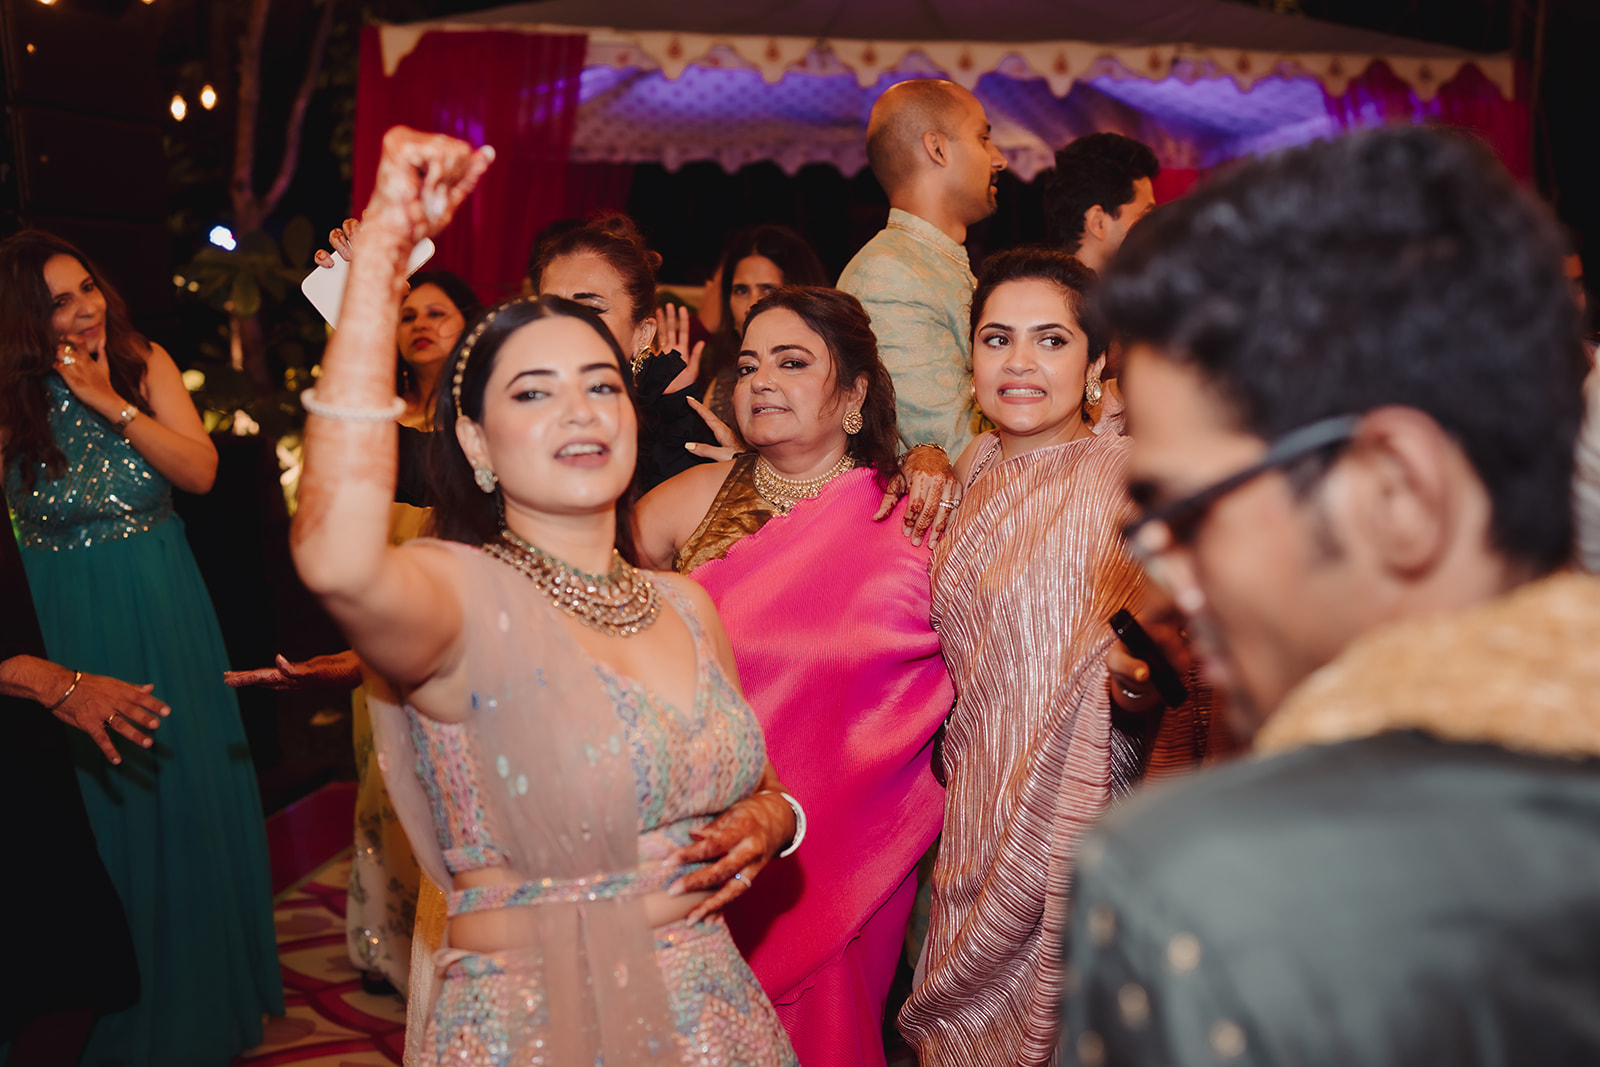 Night of fun: Capturing the enthusiasm as a guest dances away in the lively atmosphere